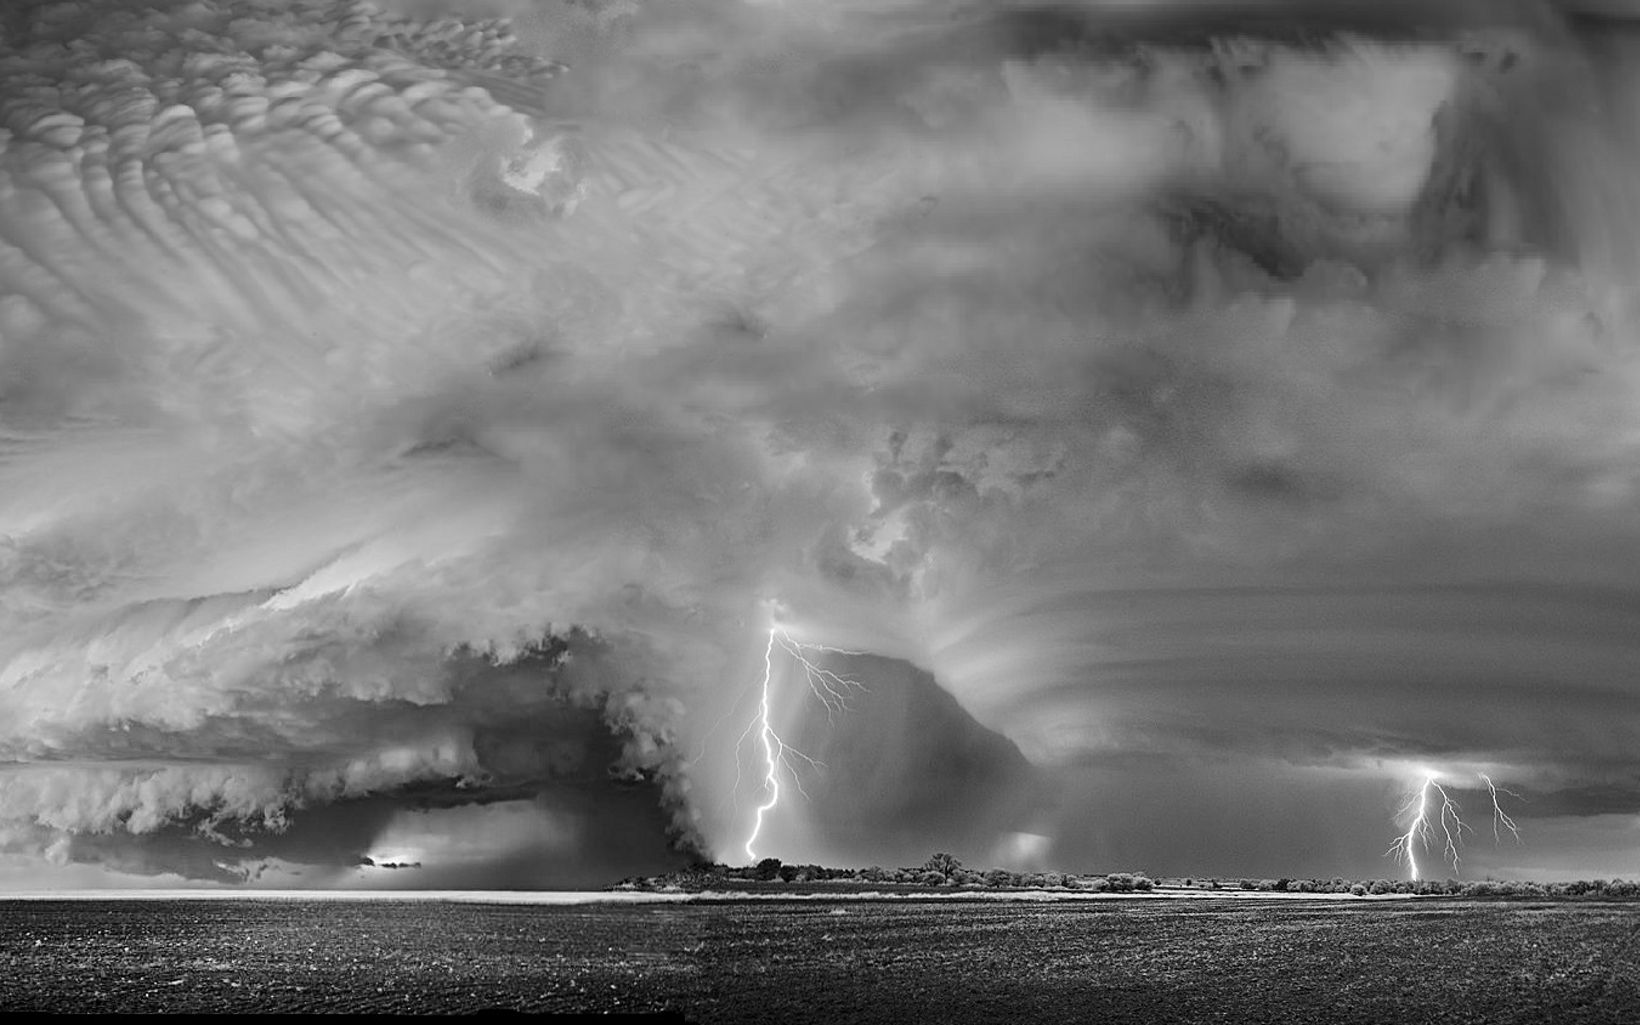  Summer storm in the Pampa